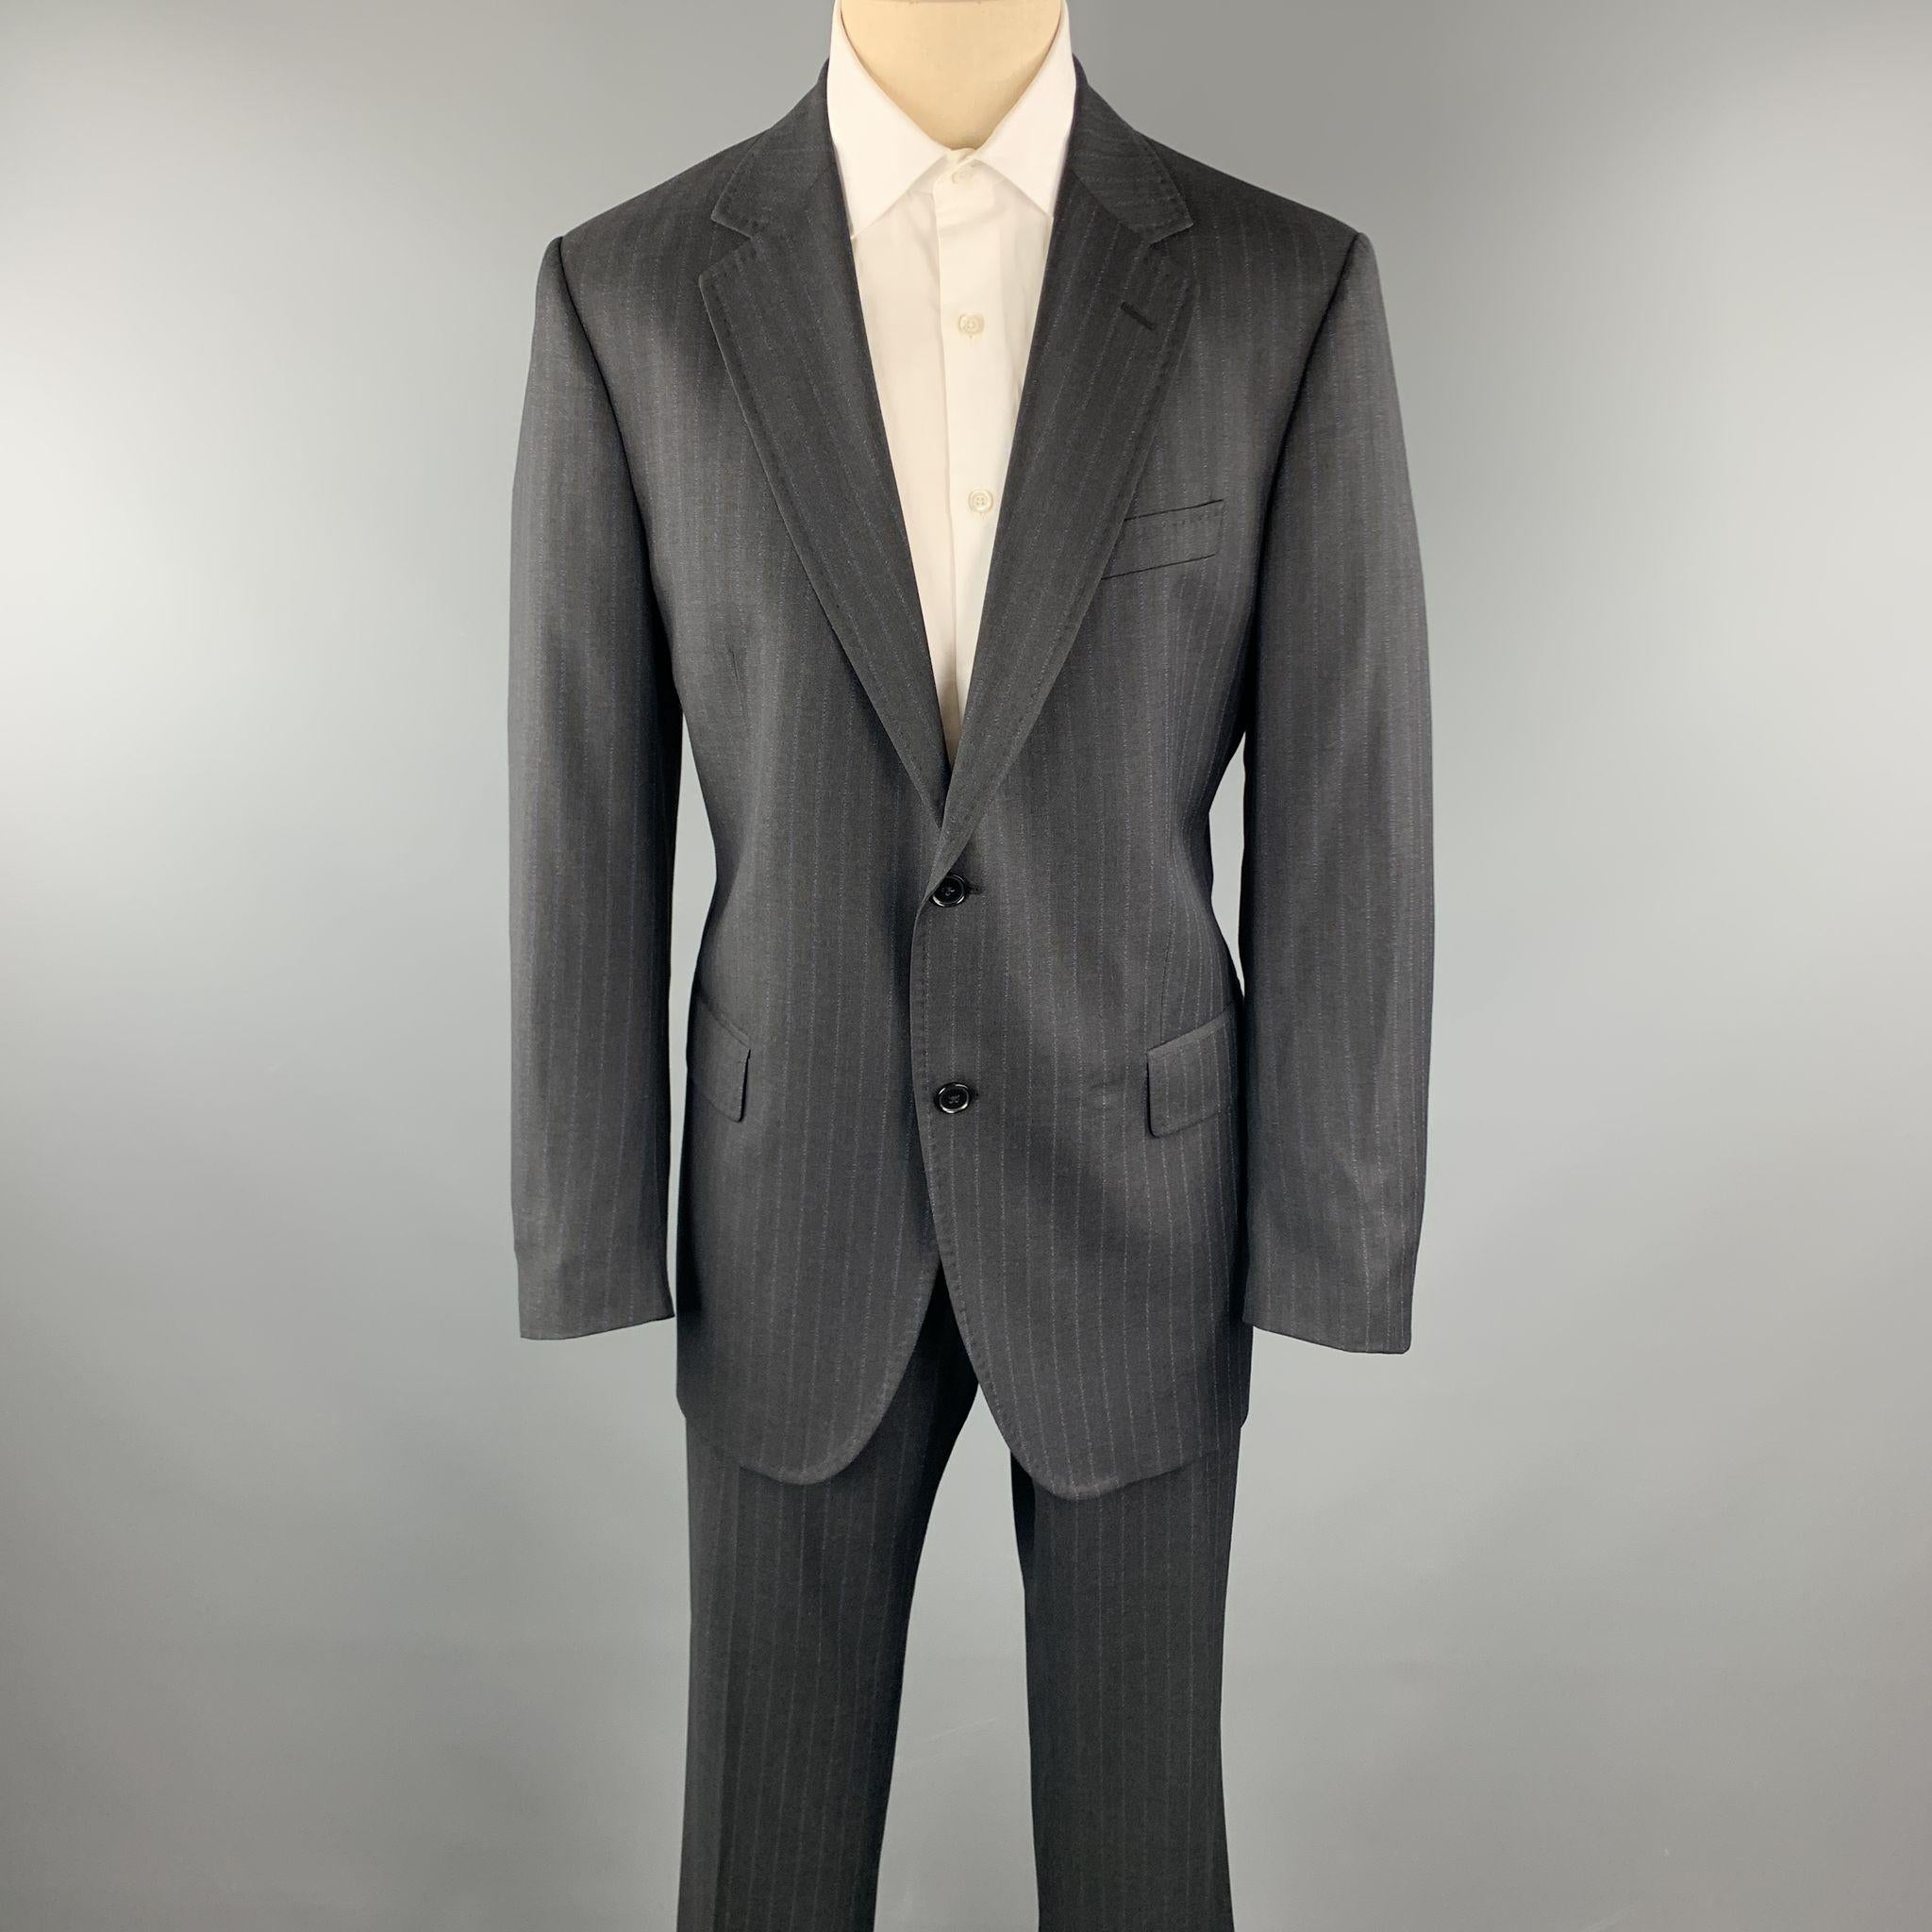 DOLCE & GABBANA suit comes in a charcoal stripe wool and includes a single breasted, two button sport coat with a notch lapel and matching pleated front trousers. Made in Italy.

Excellent Pre-Owned Condition.
Marked: IT